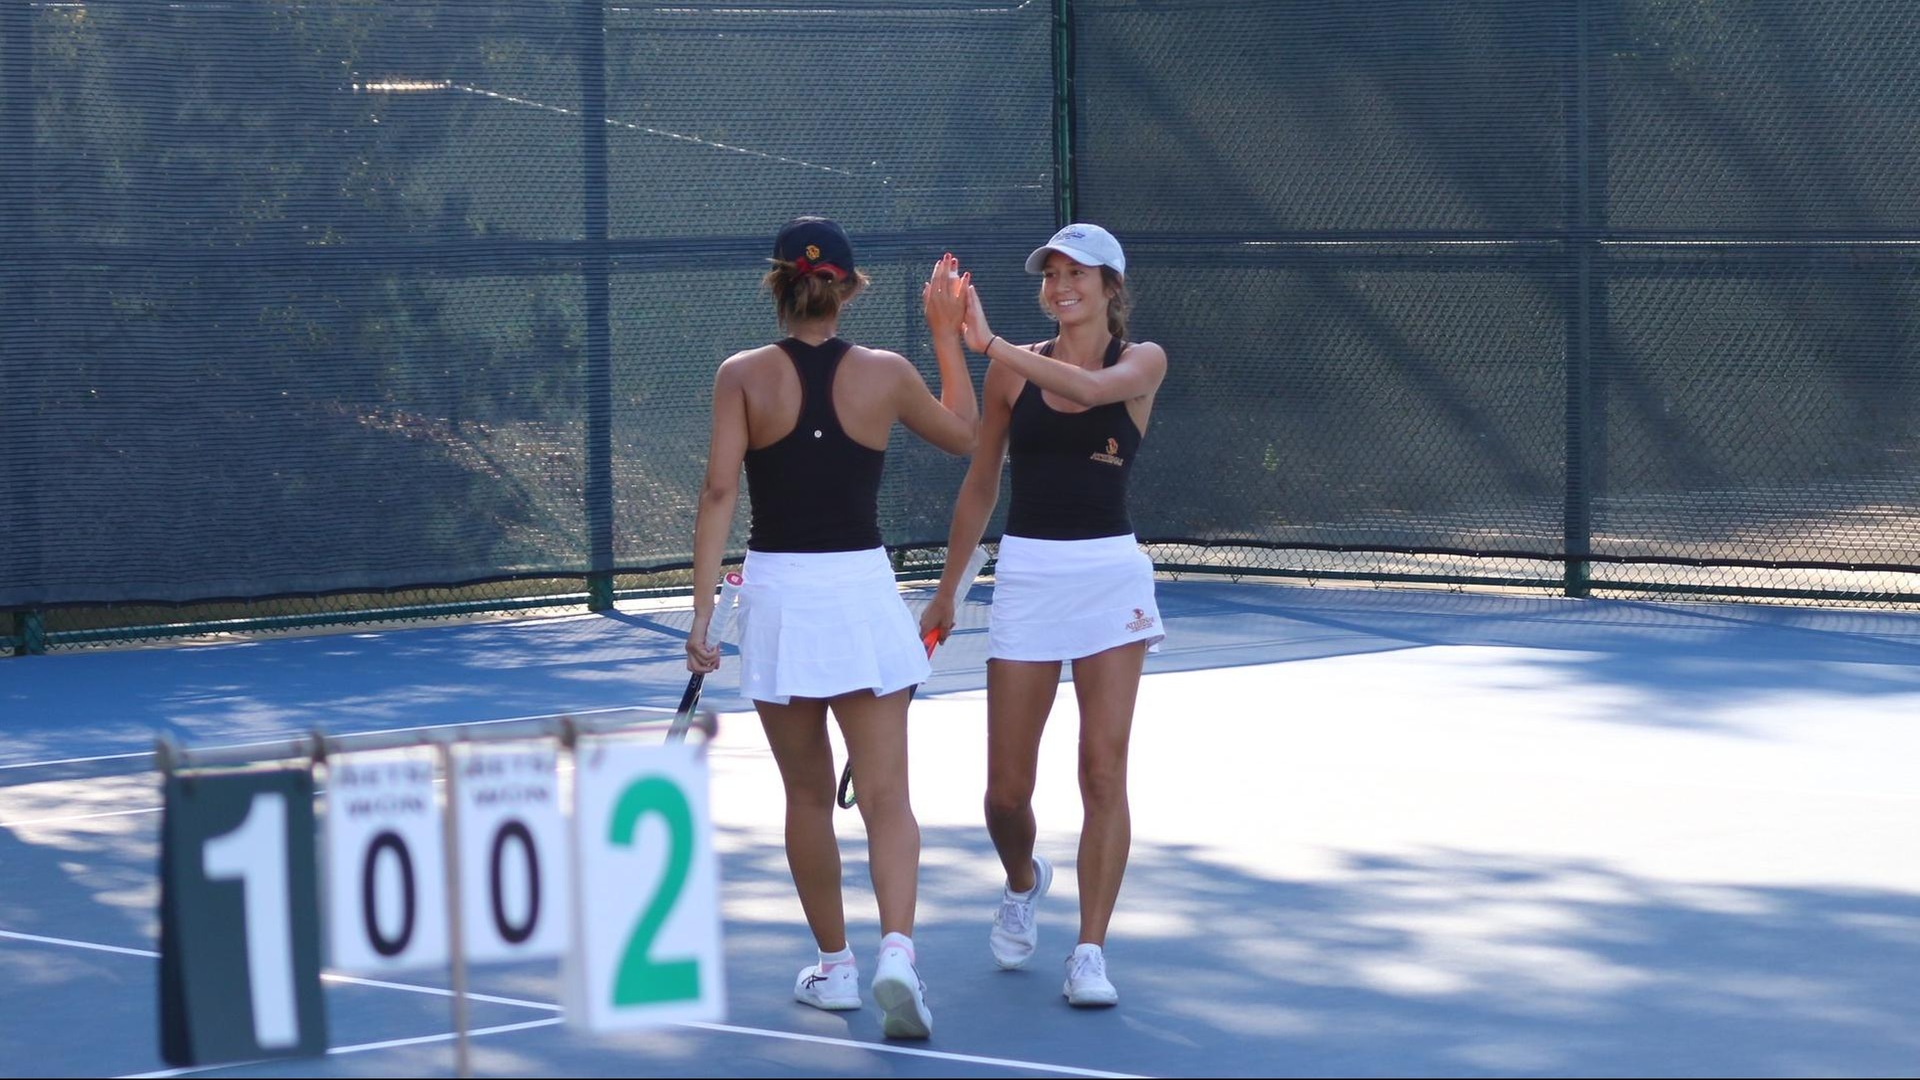 Gabby Lee and Crystal Juan exchanging a high-five